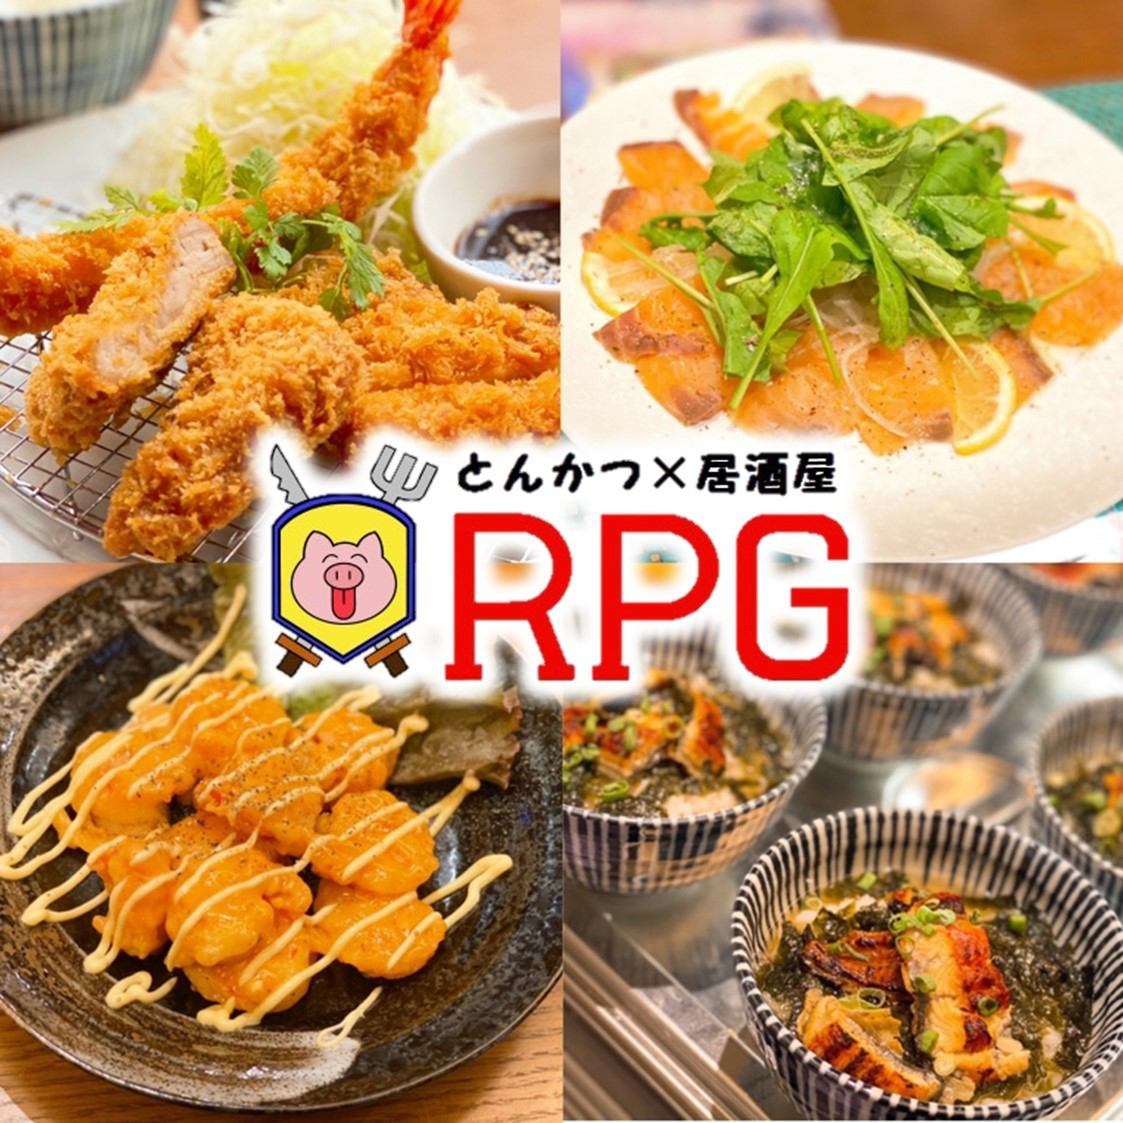 We offer branded pork at a reasonable price! It goes well with sake ♪